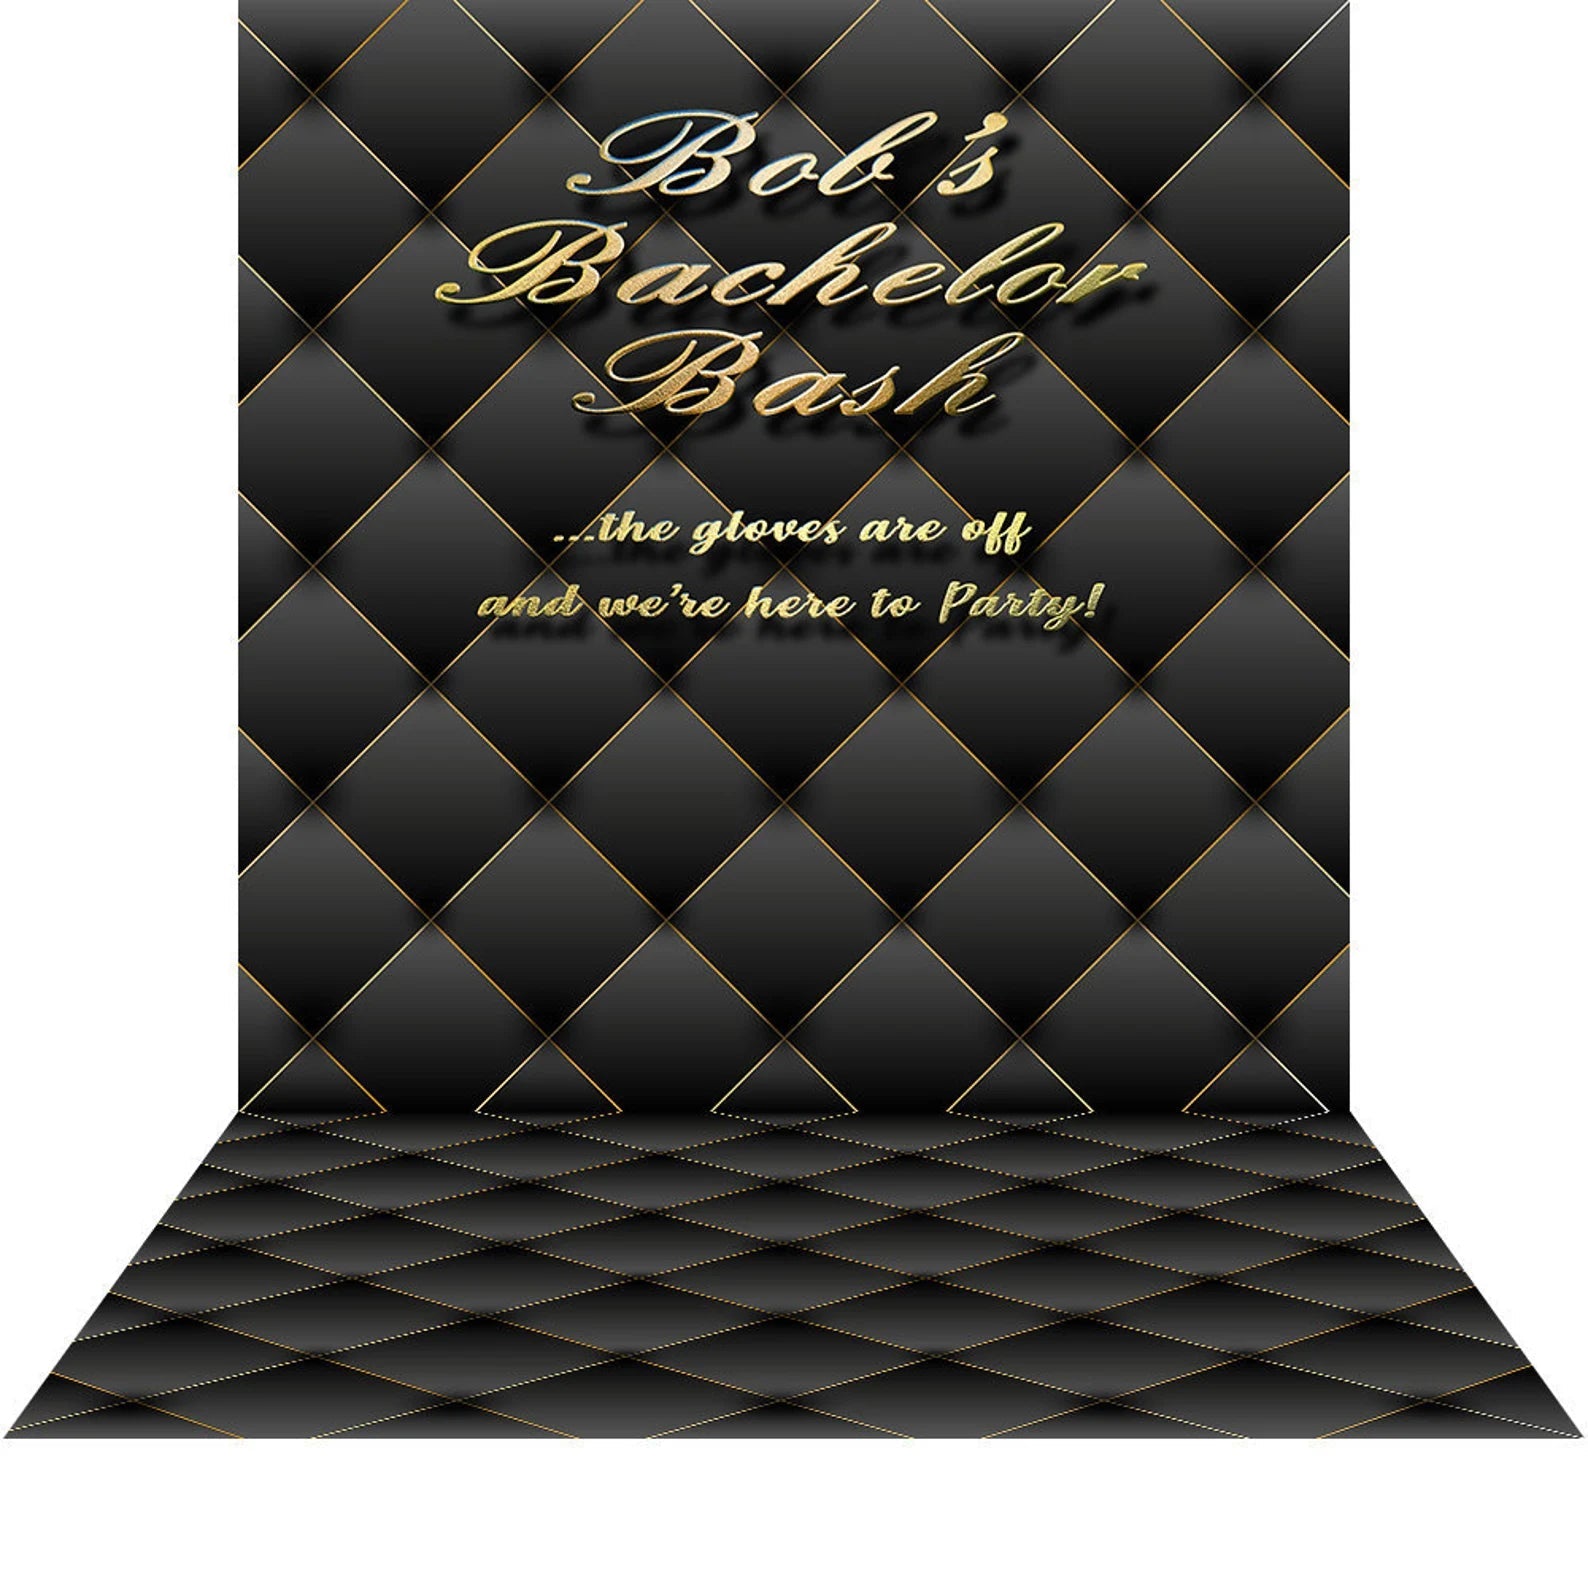 Gold Black Curtain Backdrop for Photography Background - Basic 8  x 16  